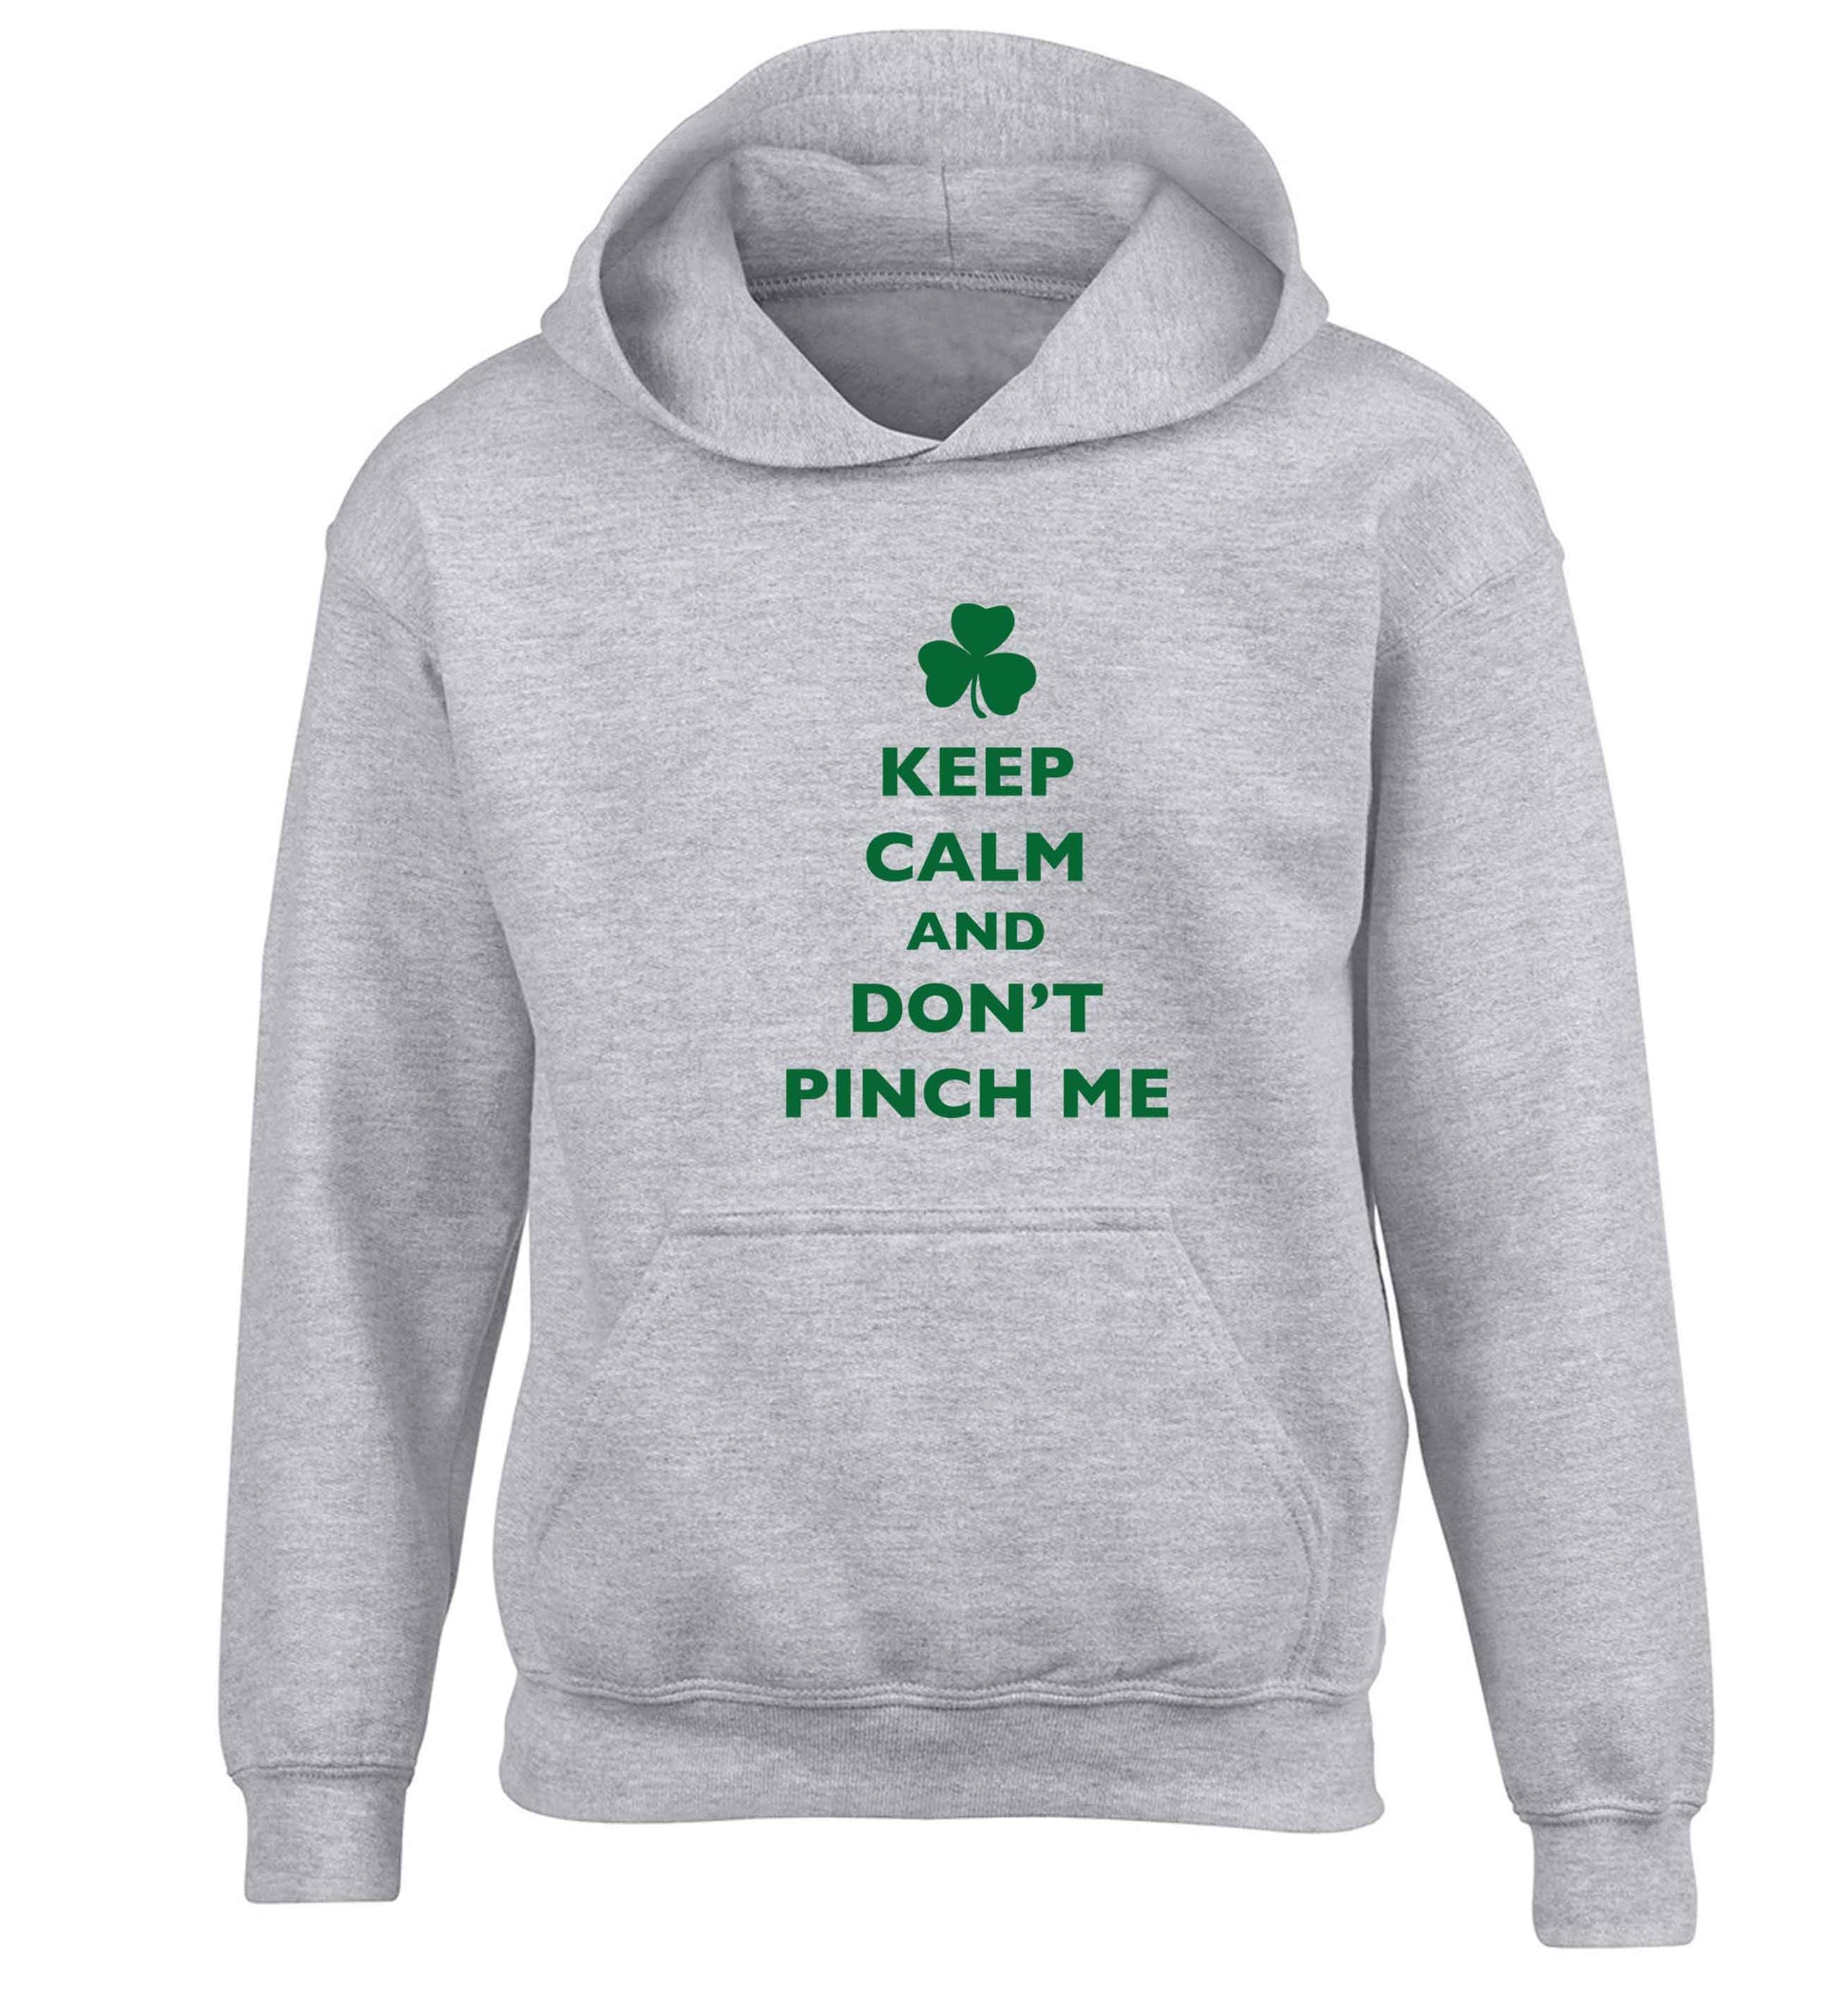 Keep calm and don't pinch me children's grey hoodie 12-13 Years